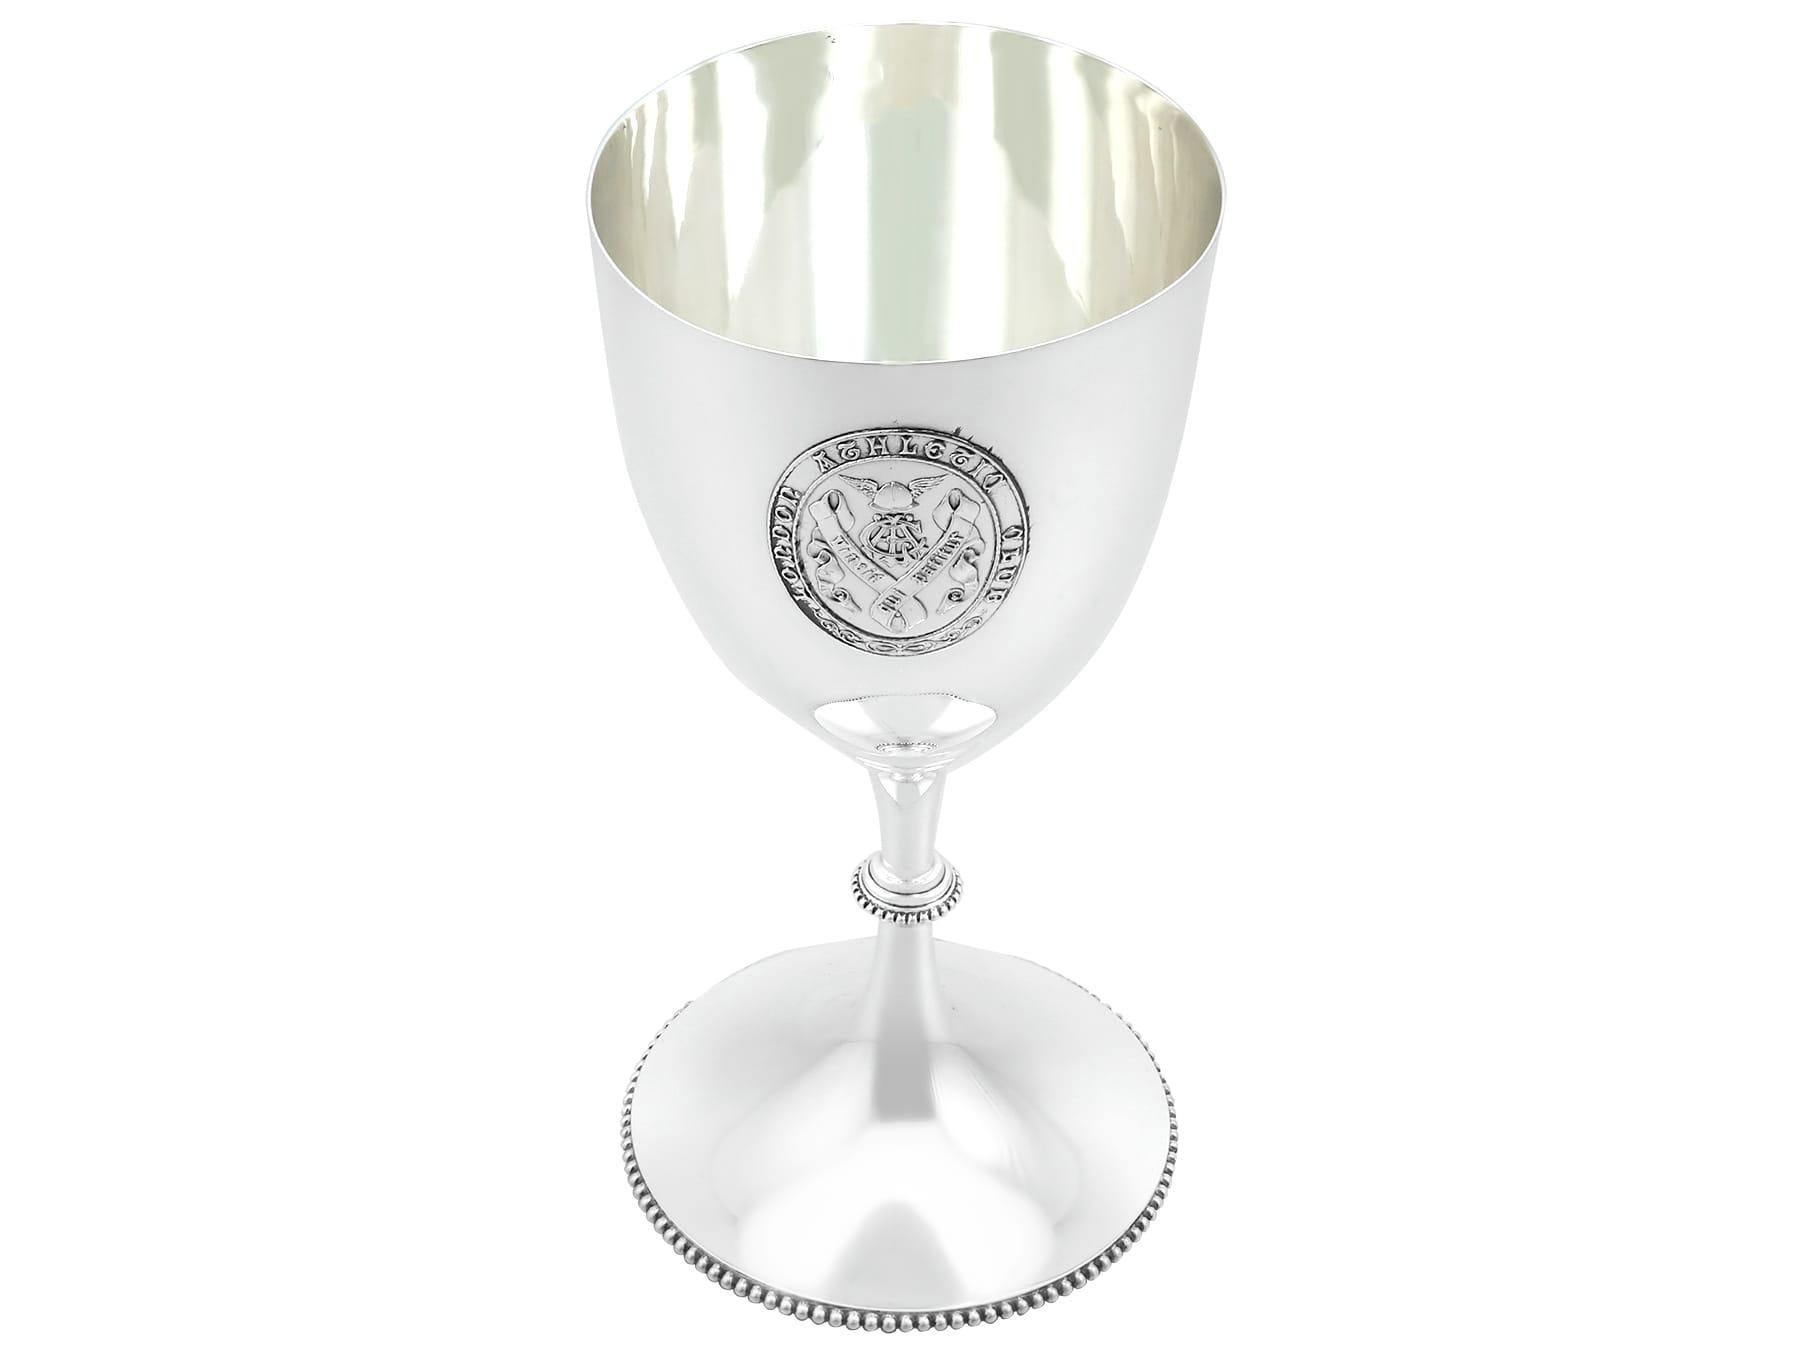 An exceptional, fine and impressive antique Victorian English sterling silver goblet; an addition to our collection of wine and drinks related silverware

This exceptional antique Victorian sterling silver wine goblet has a circular bell-shaped